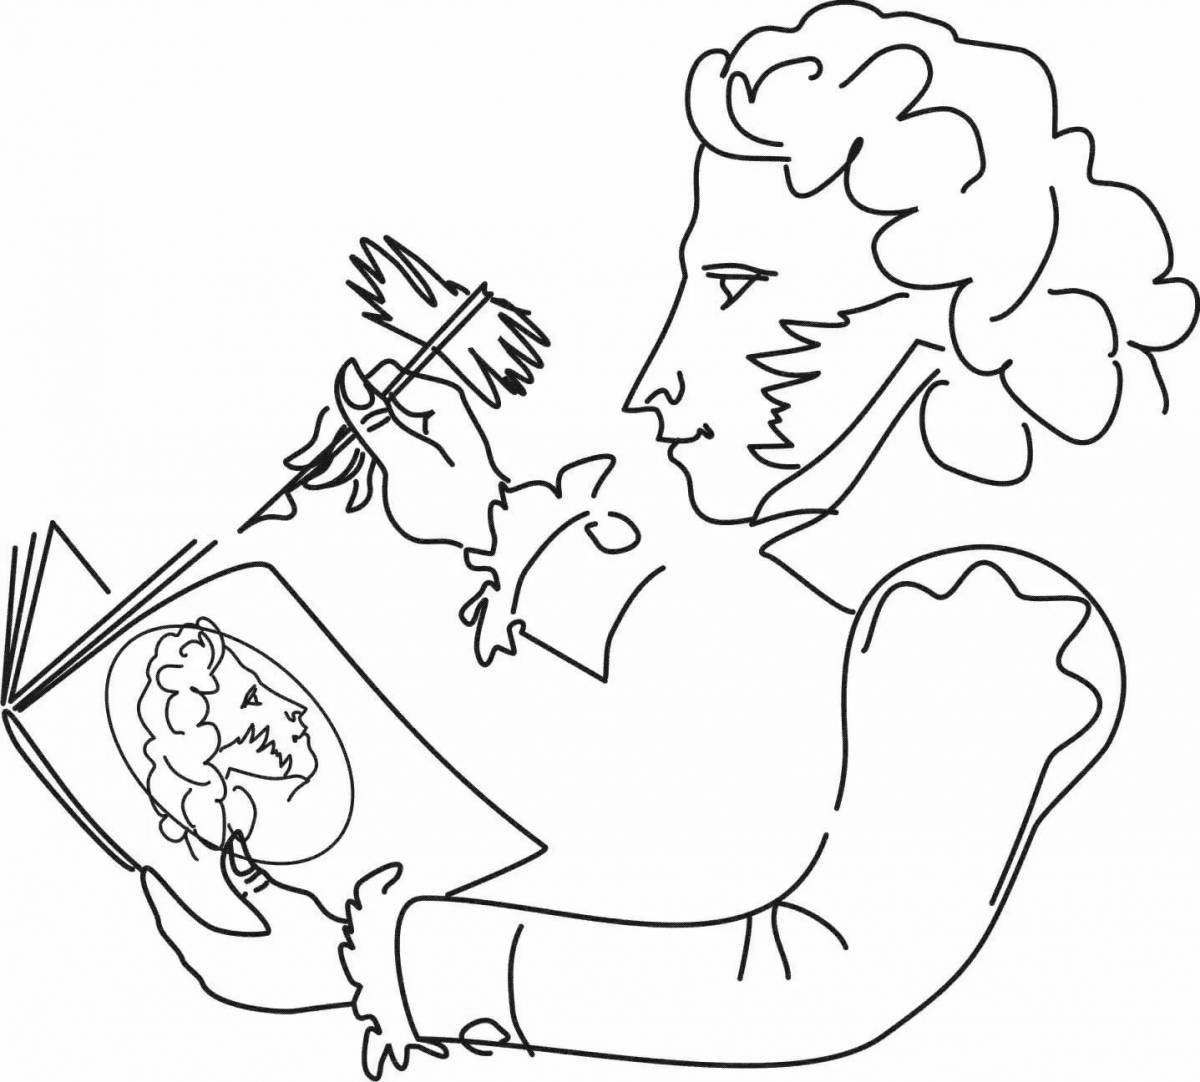 A wonderful coloring book based on Pushkin's works